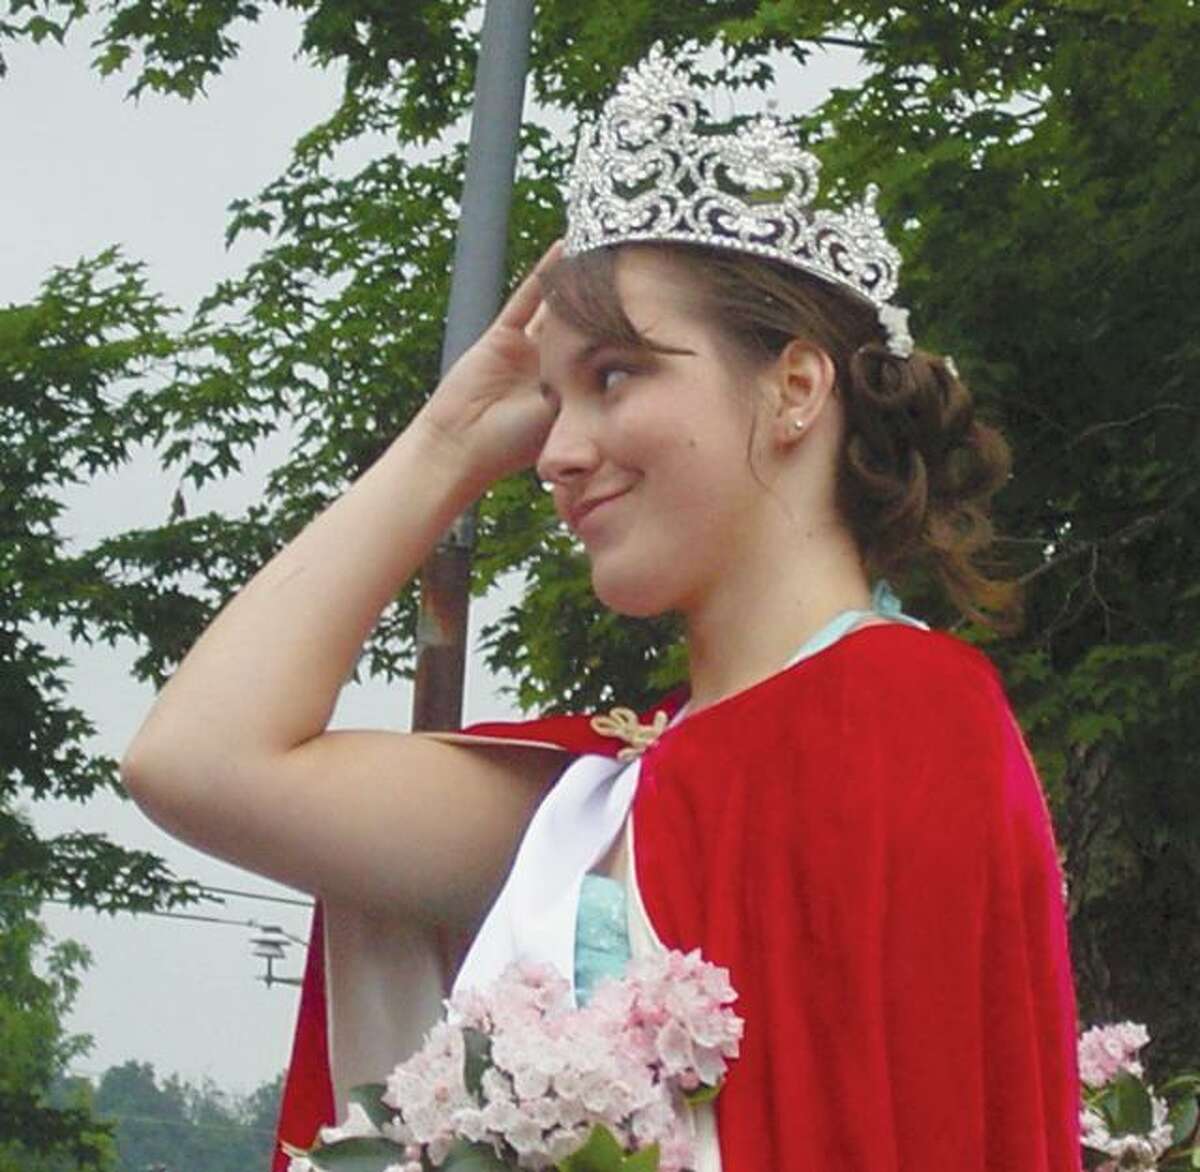 Laurel Queen, Rebecca Nardi, who is stepping down for the new queen. Who will it be?